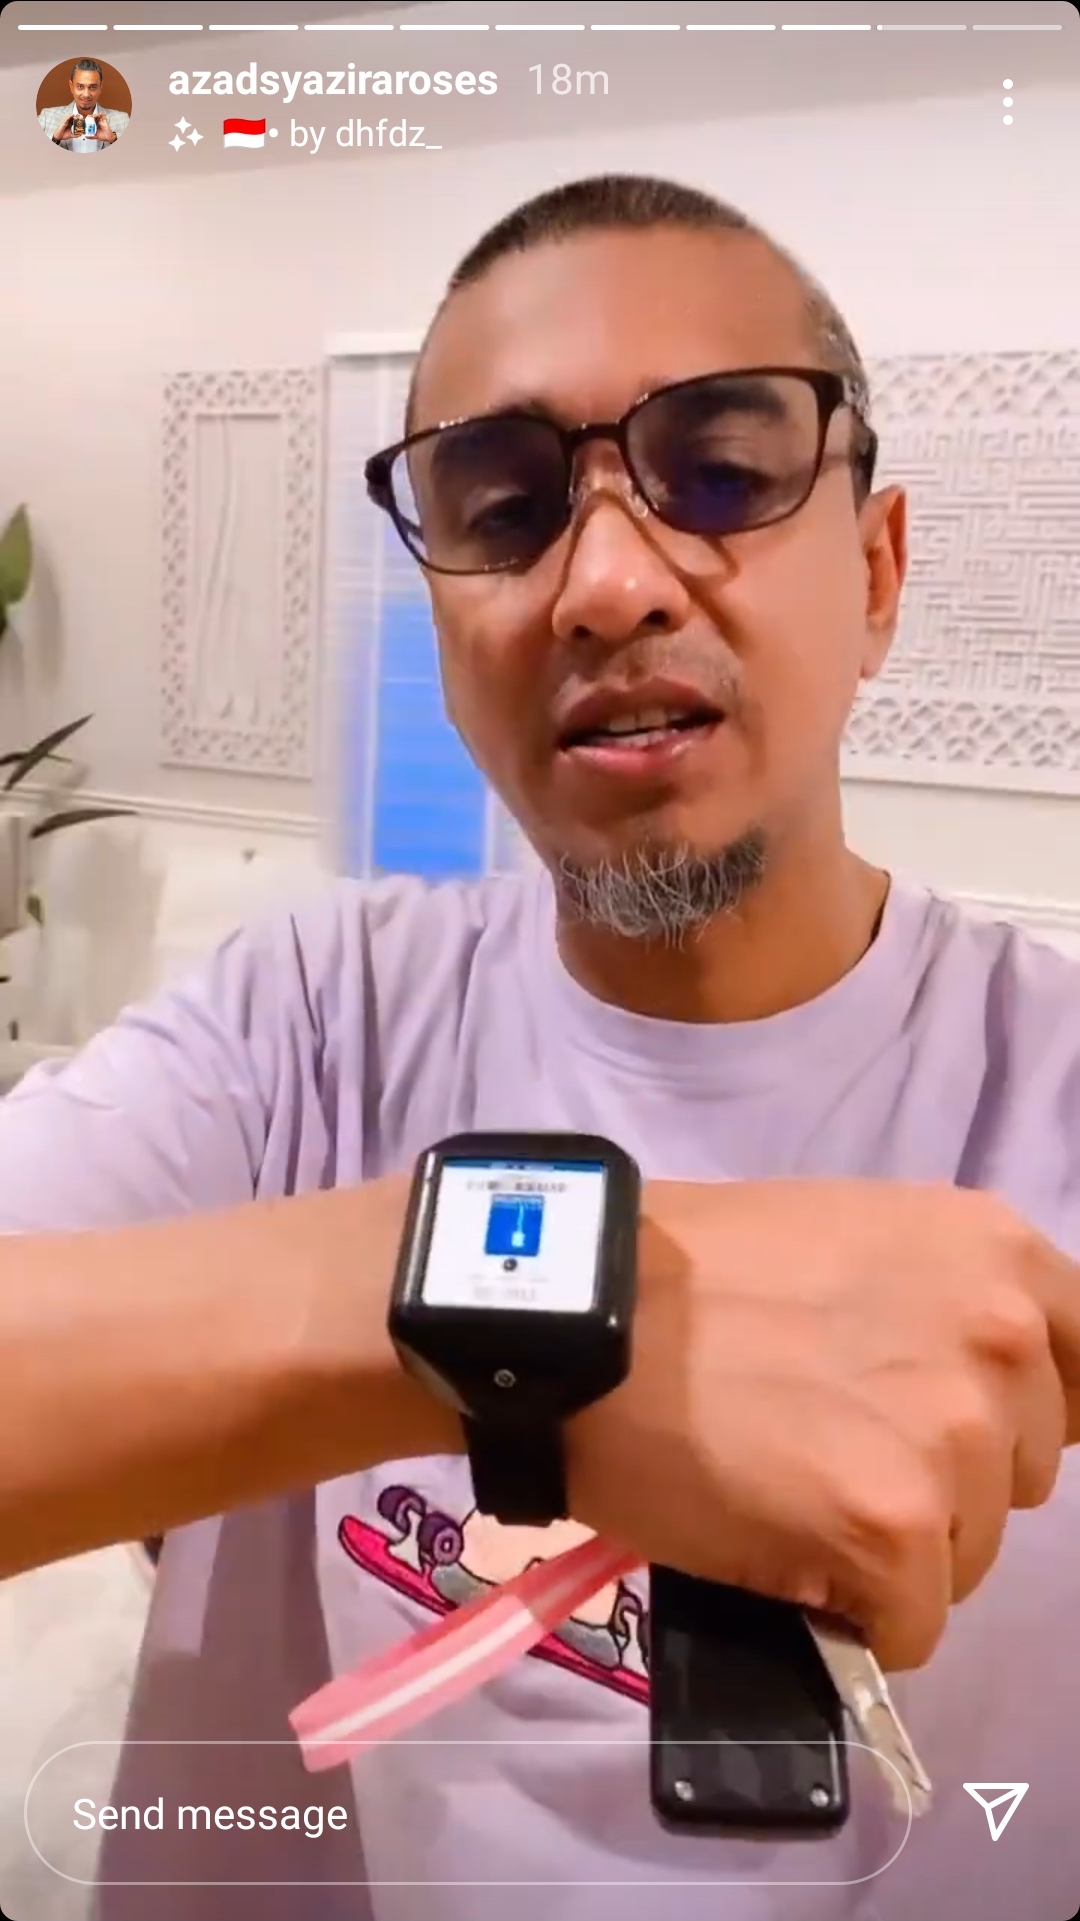 'did you buy it from shopee? ' actor azad jazmin questions kj over substandard digital tracking device | weirdkaya